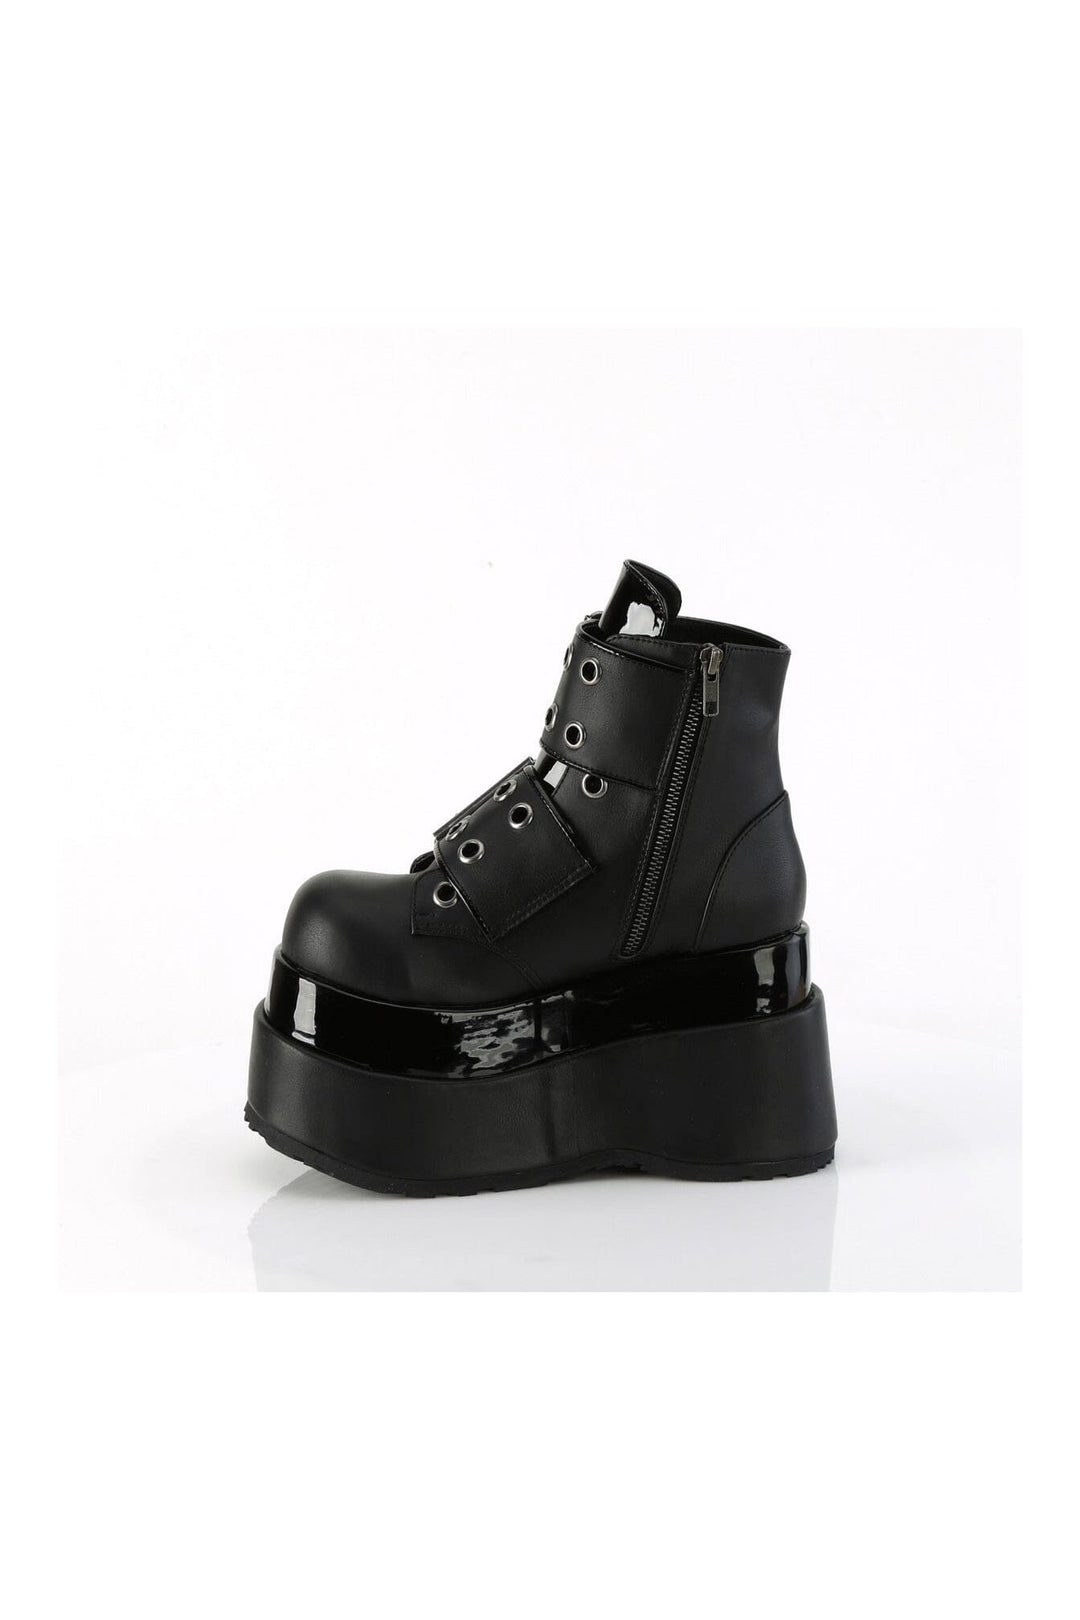 BEAR-104 Black Vegan Leather Ankle Boot-Ankle Boots-Demonia-SEXYSHOES.COM